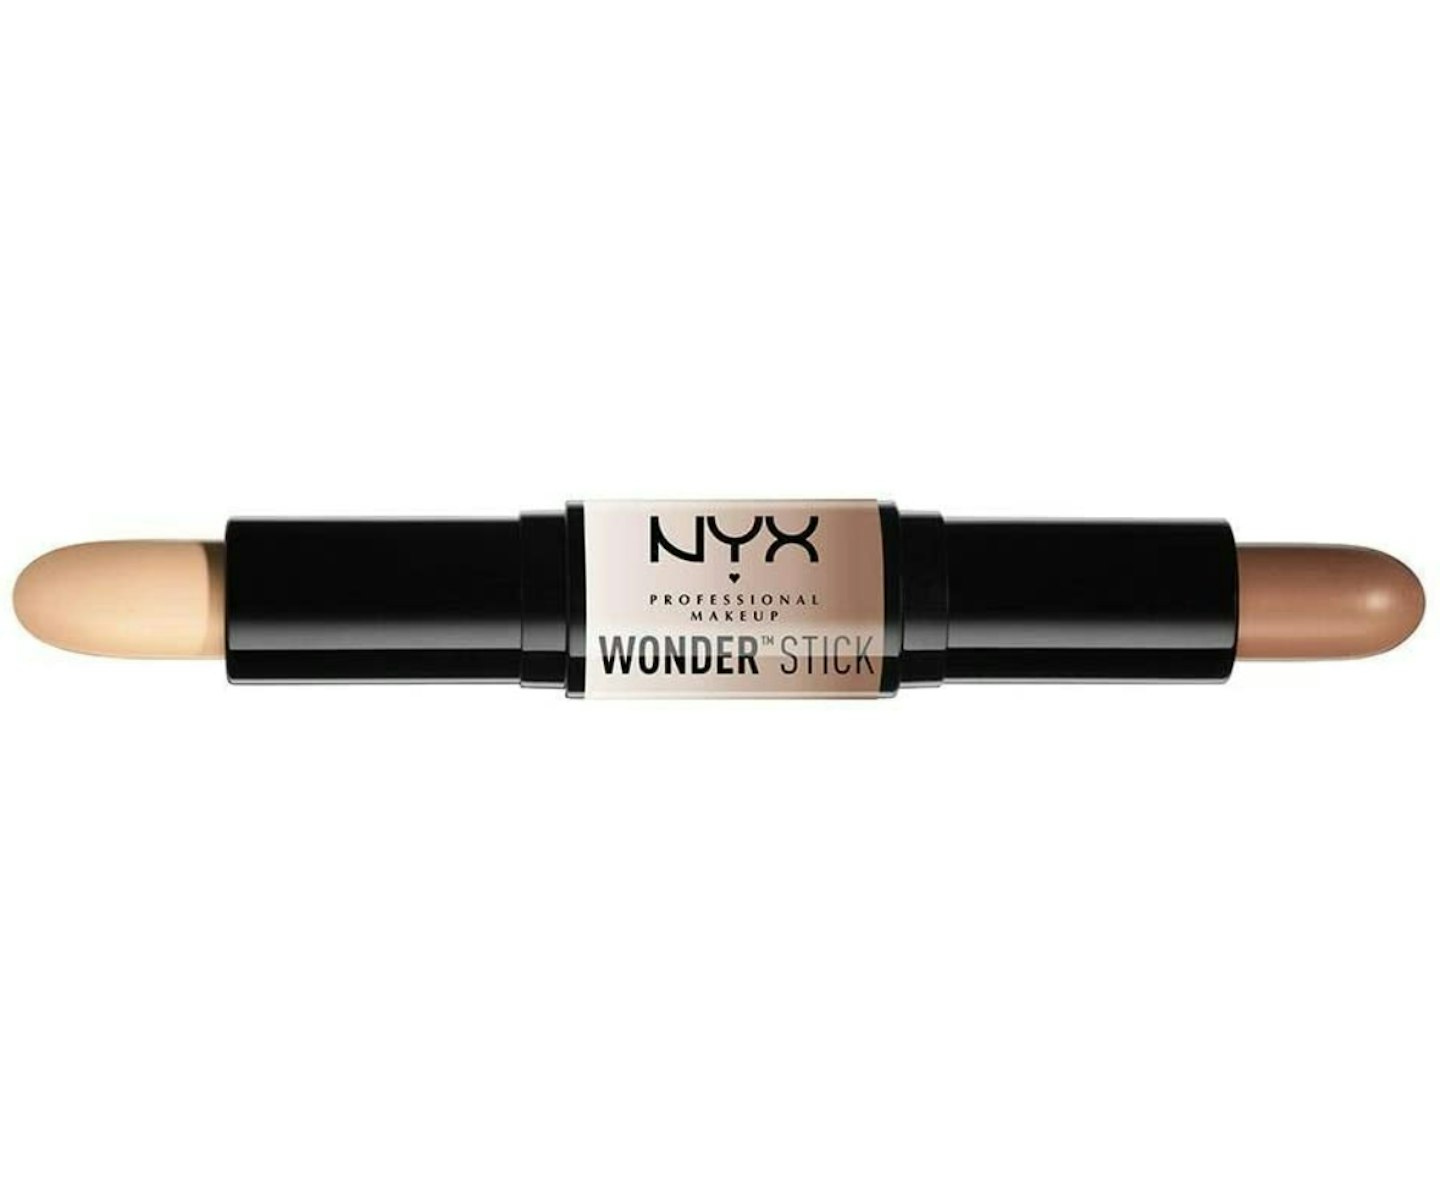 A picture of the NYX Wonder Stick Contour and Highlight